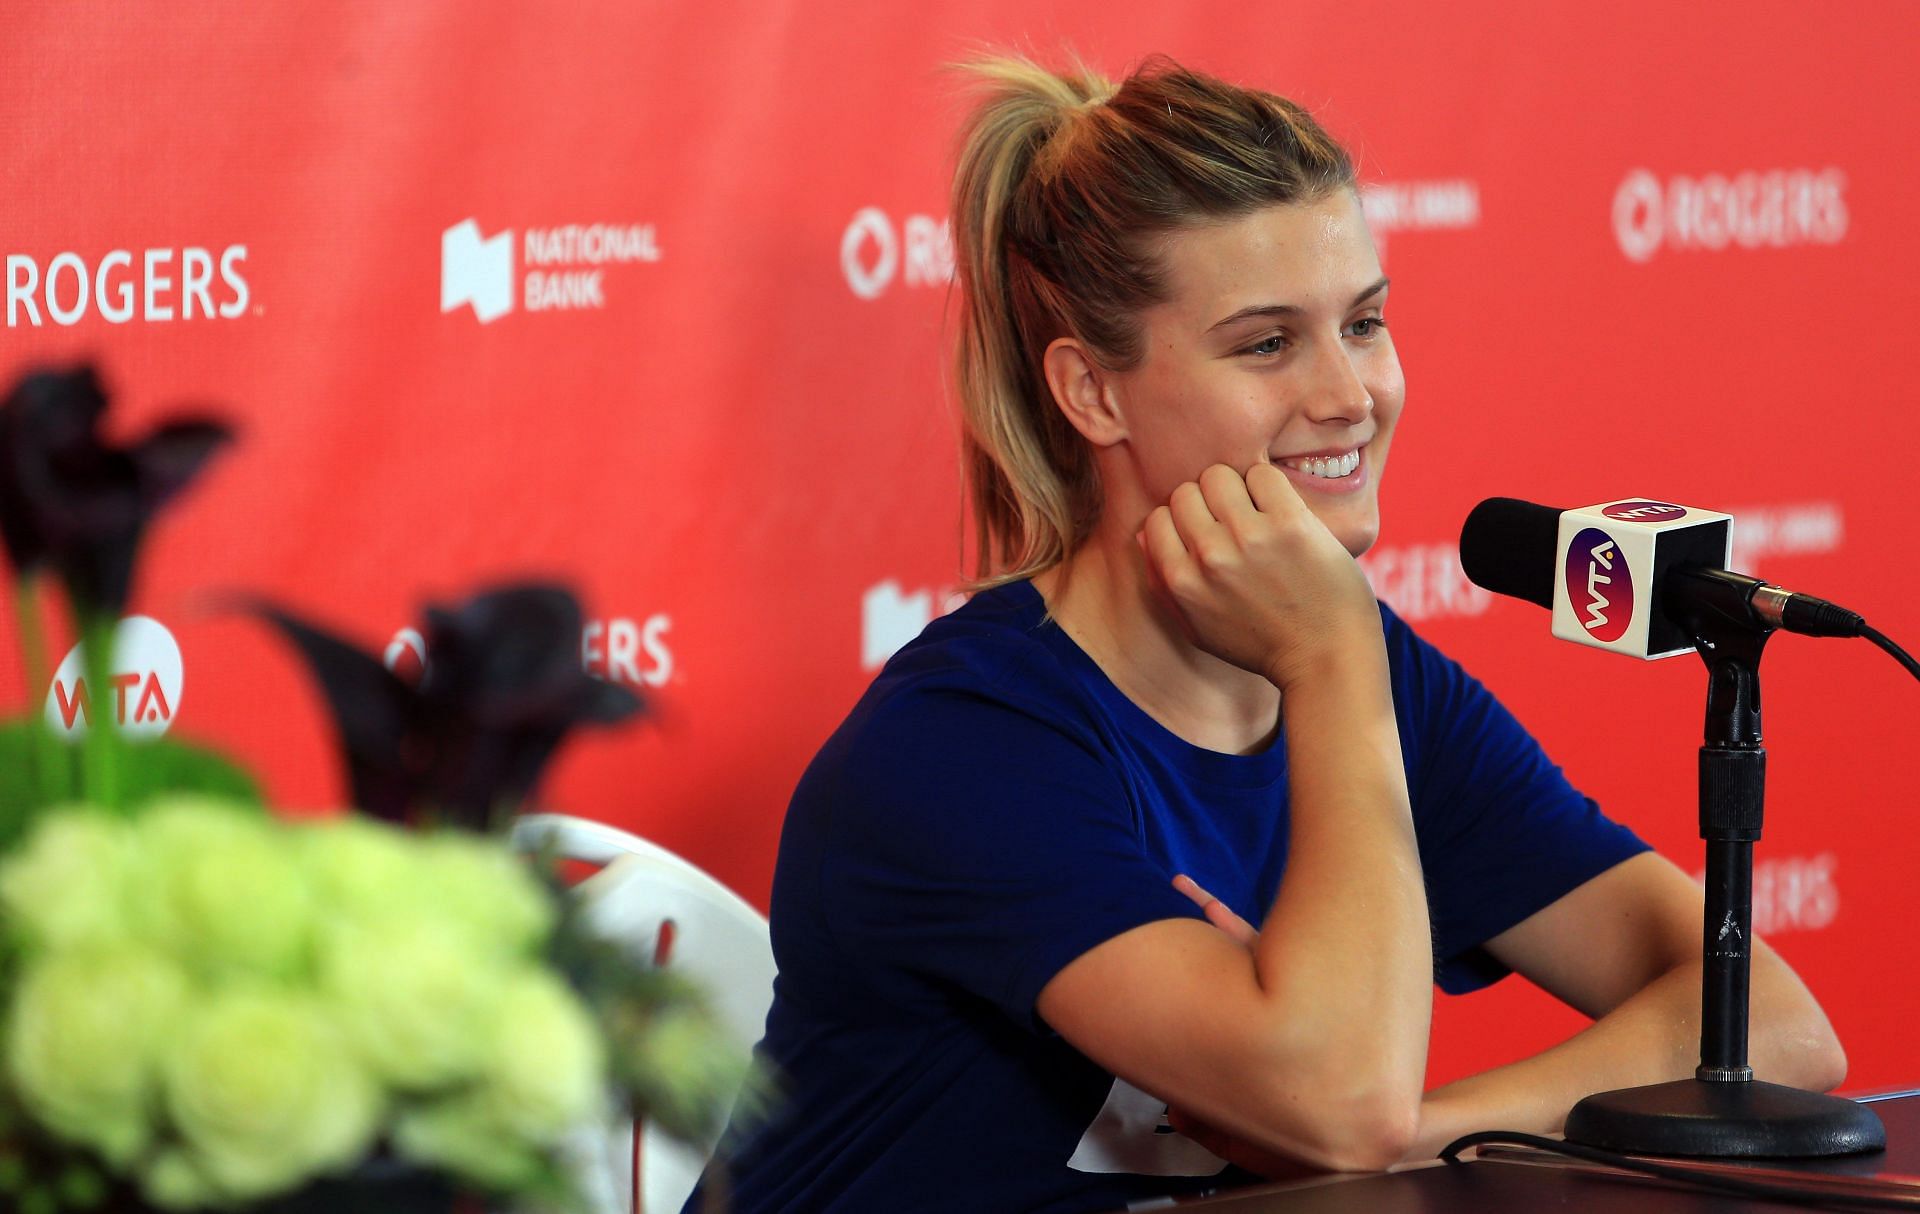 Rogers Cup presented by National Bank - Day 4